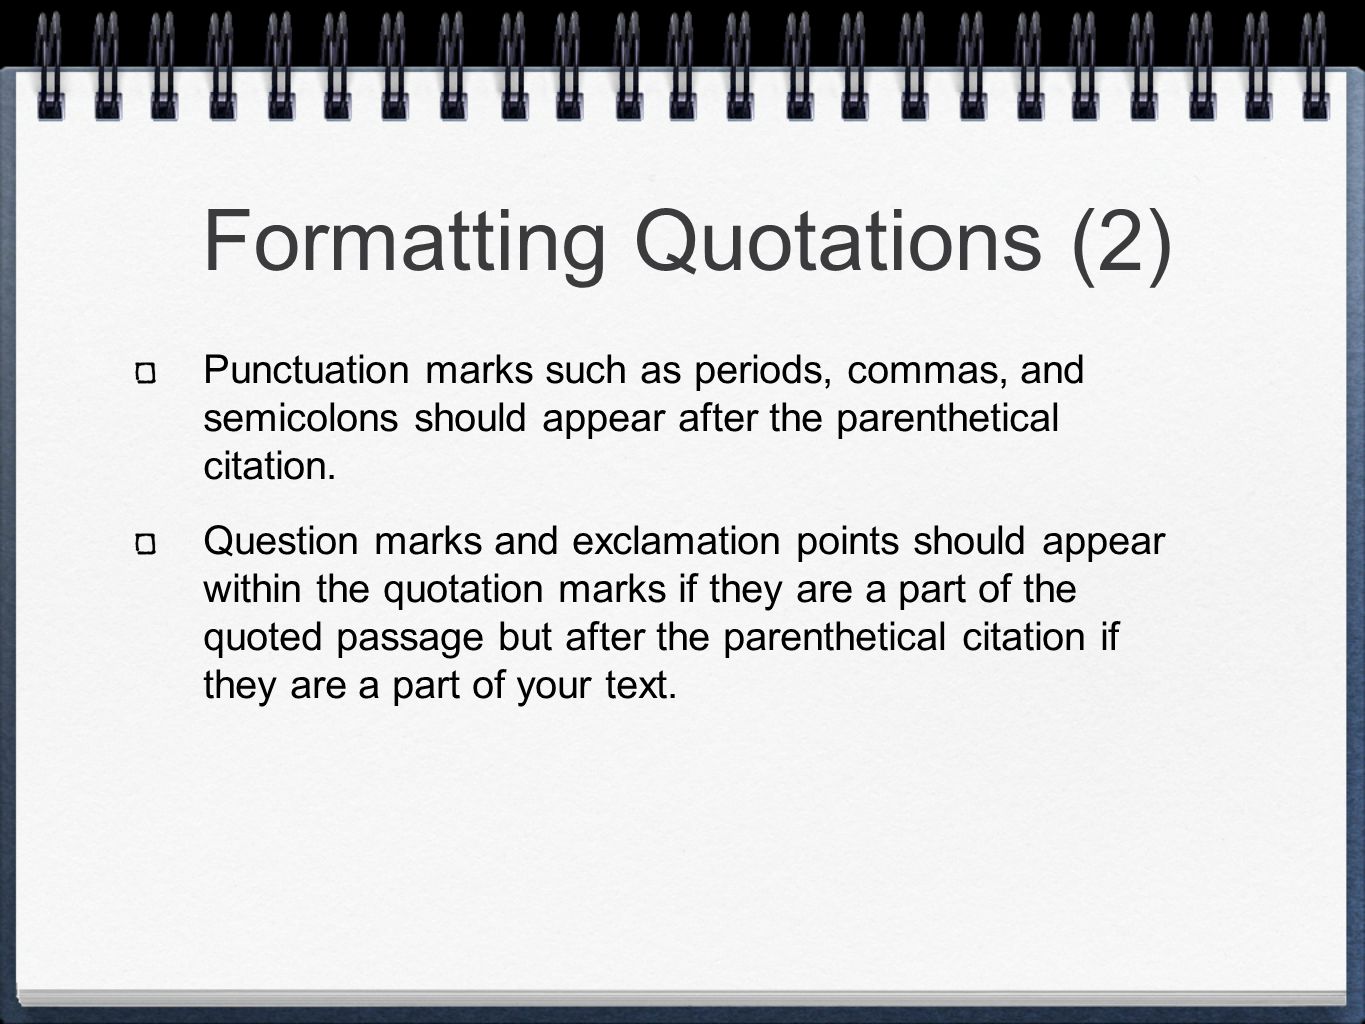 Formatting Quotations (2) Punctuation marks such as periods, commas, and semicolons should appear after the parenthetical citation.